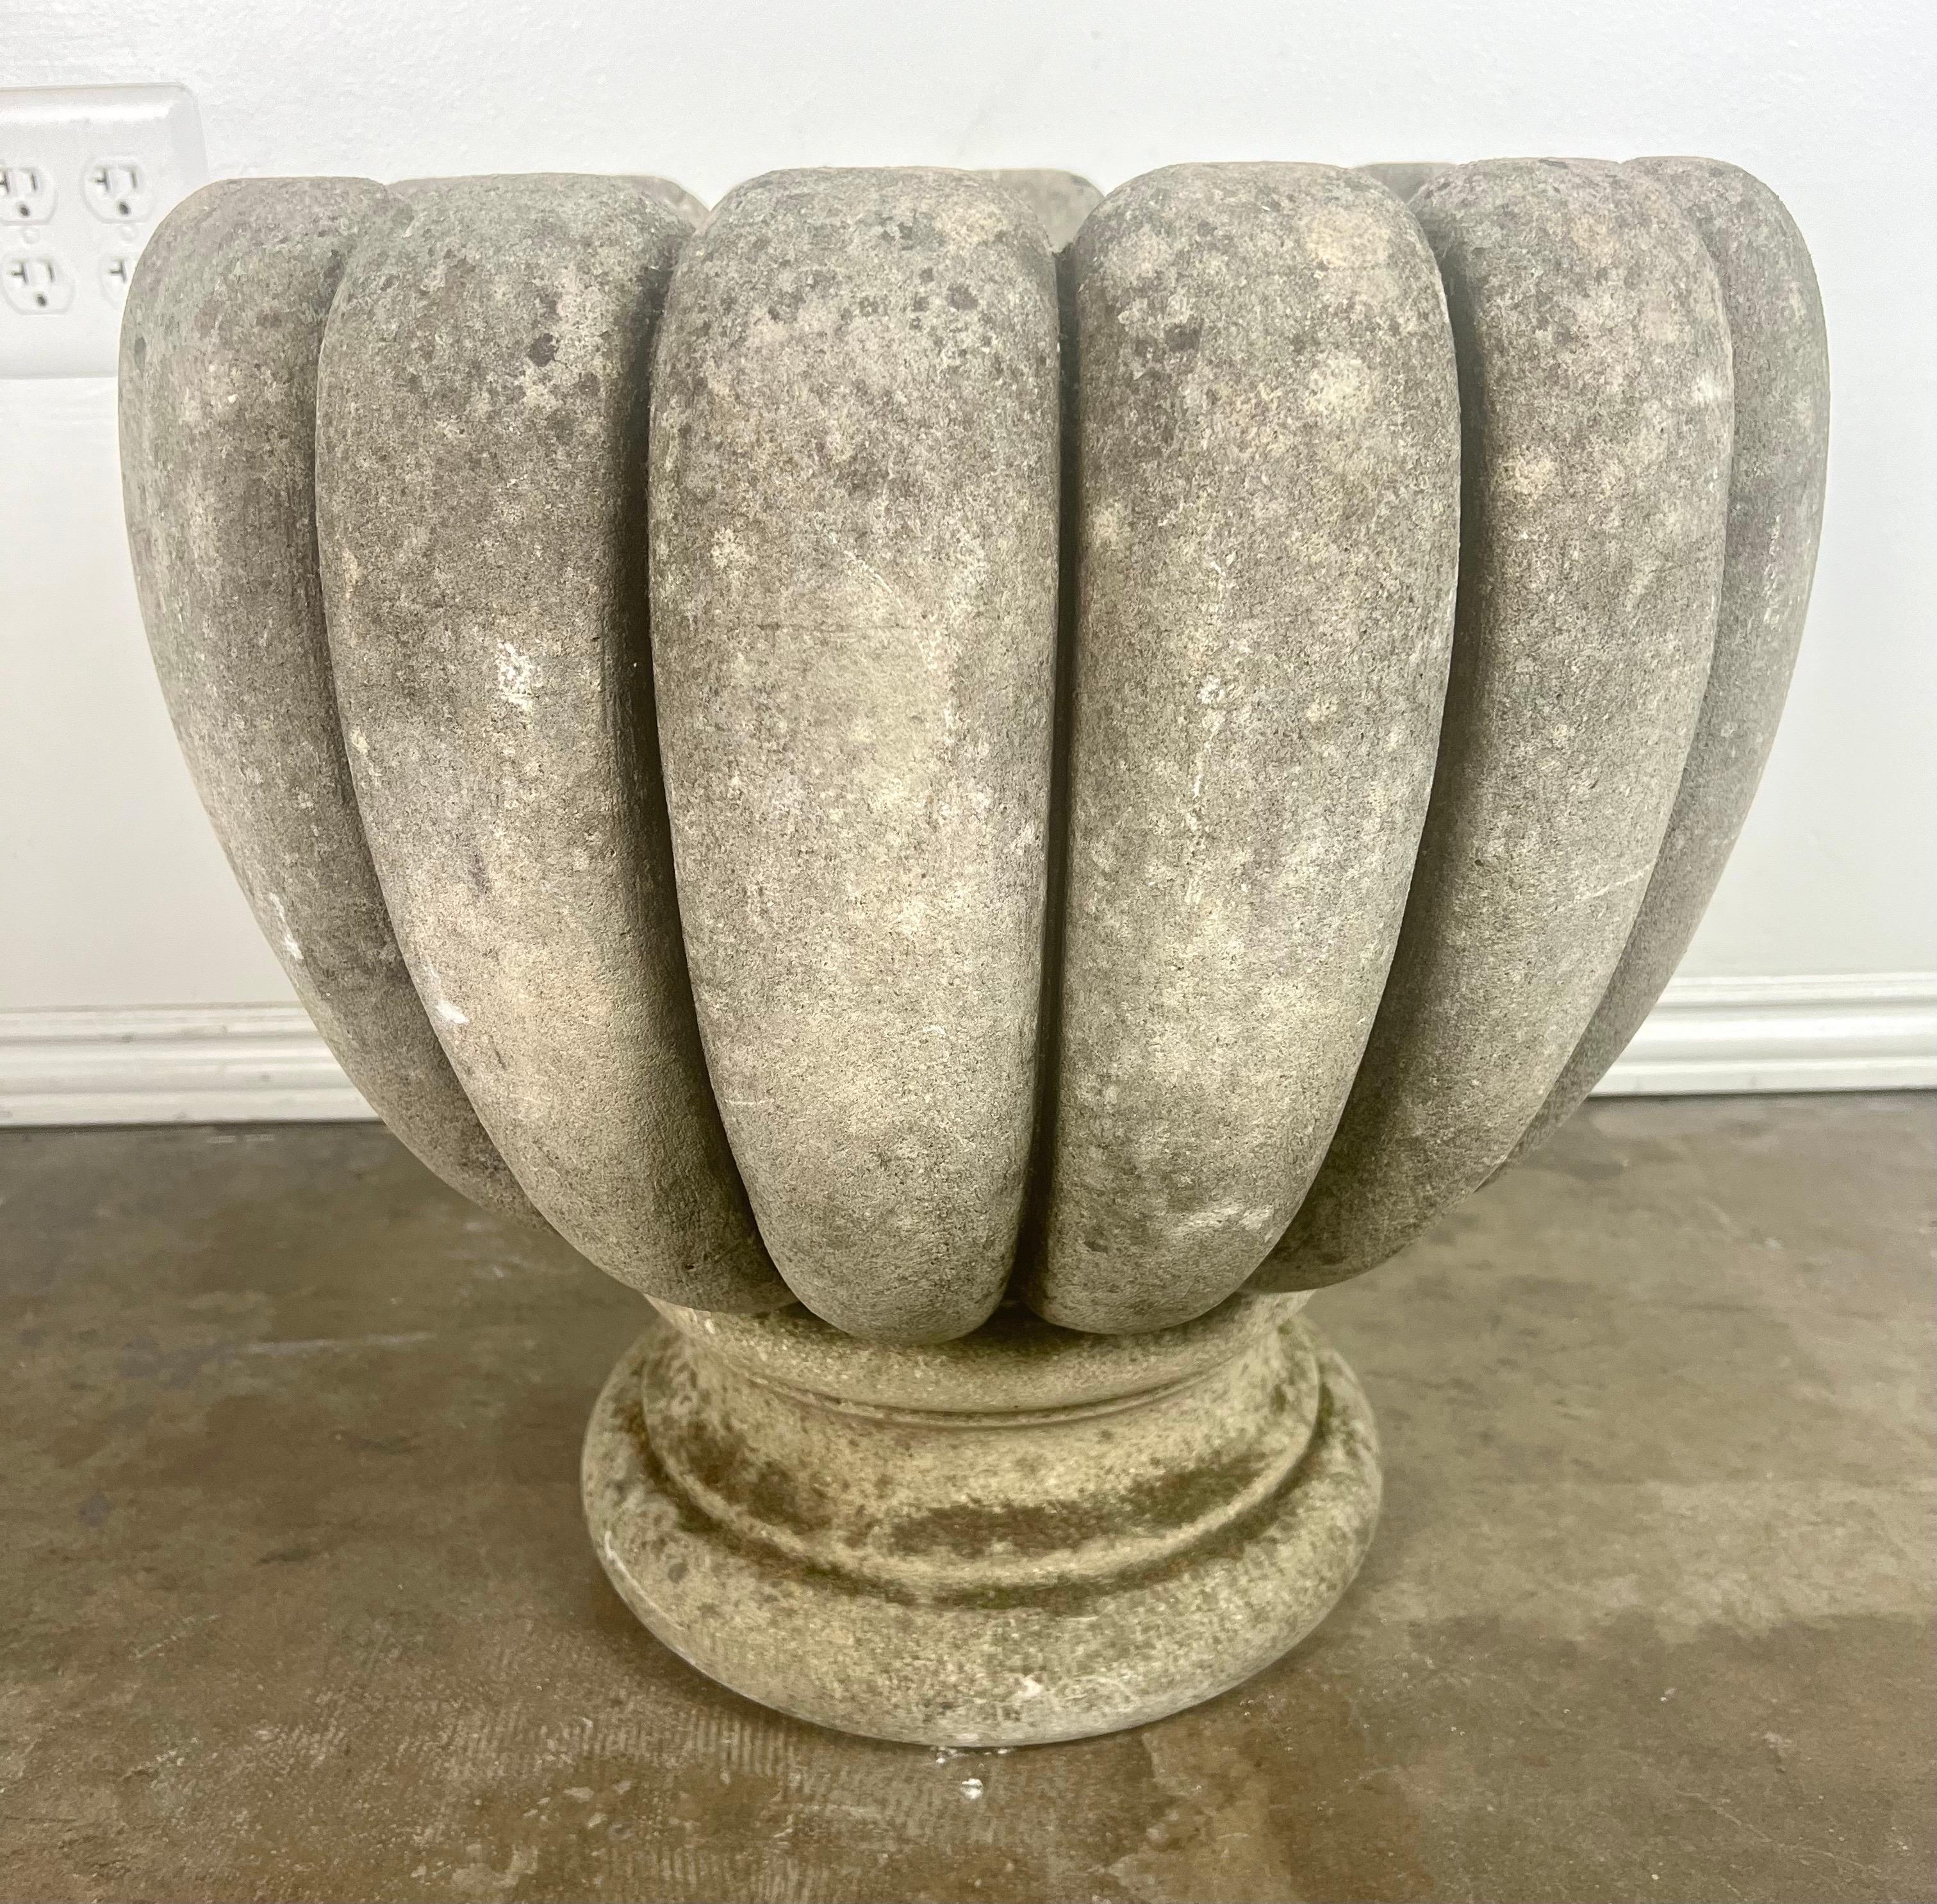 This Italian tulip-shaped urn or planter, crafted from cement, combines robust functionality with aesthetic grace, making it a striking addition to any garden setting.  The tulip shape is unique, providing a soft, curved outline that contrasts